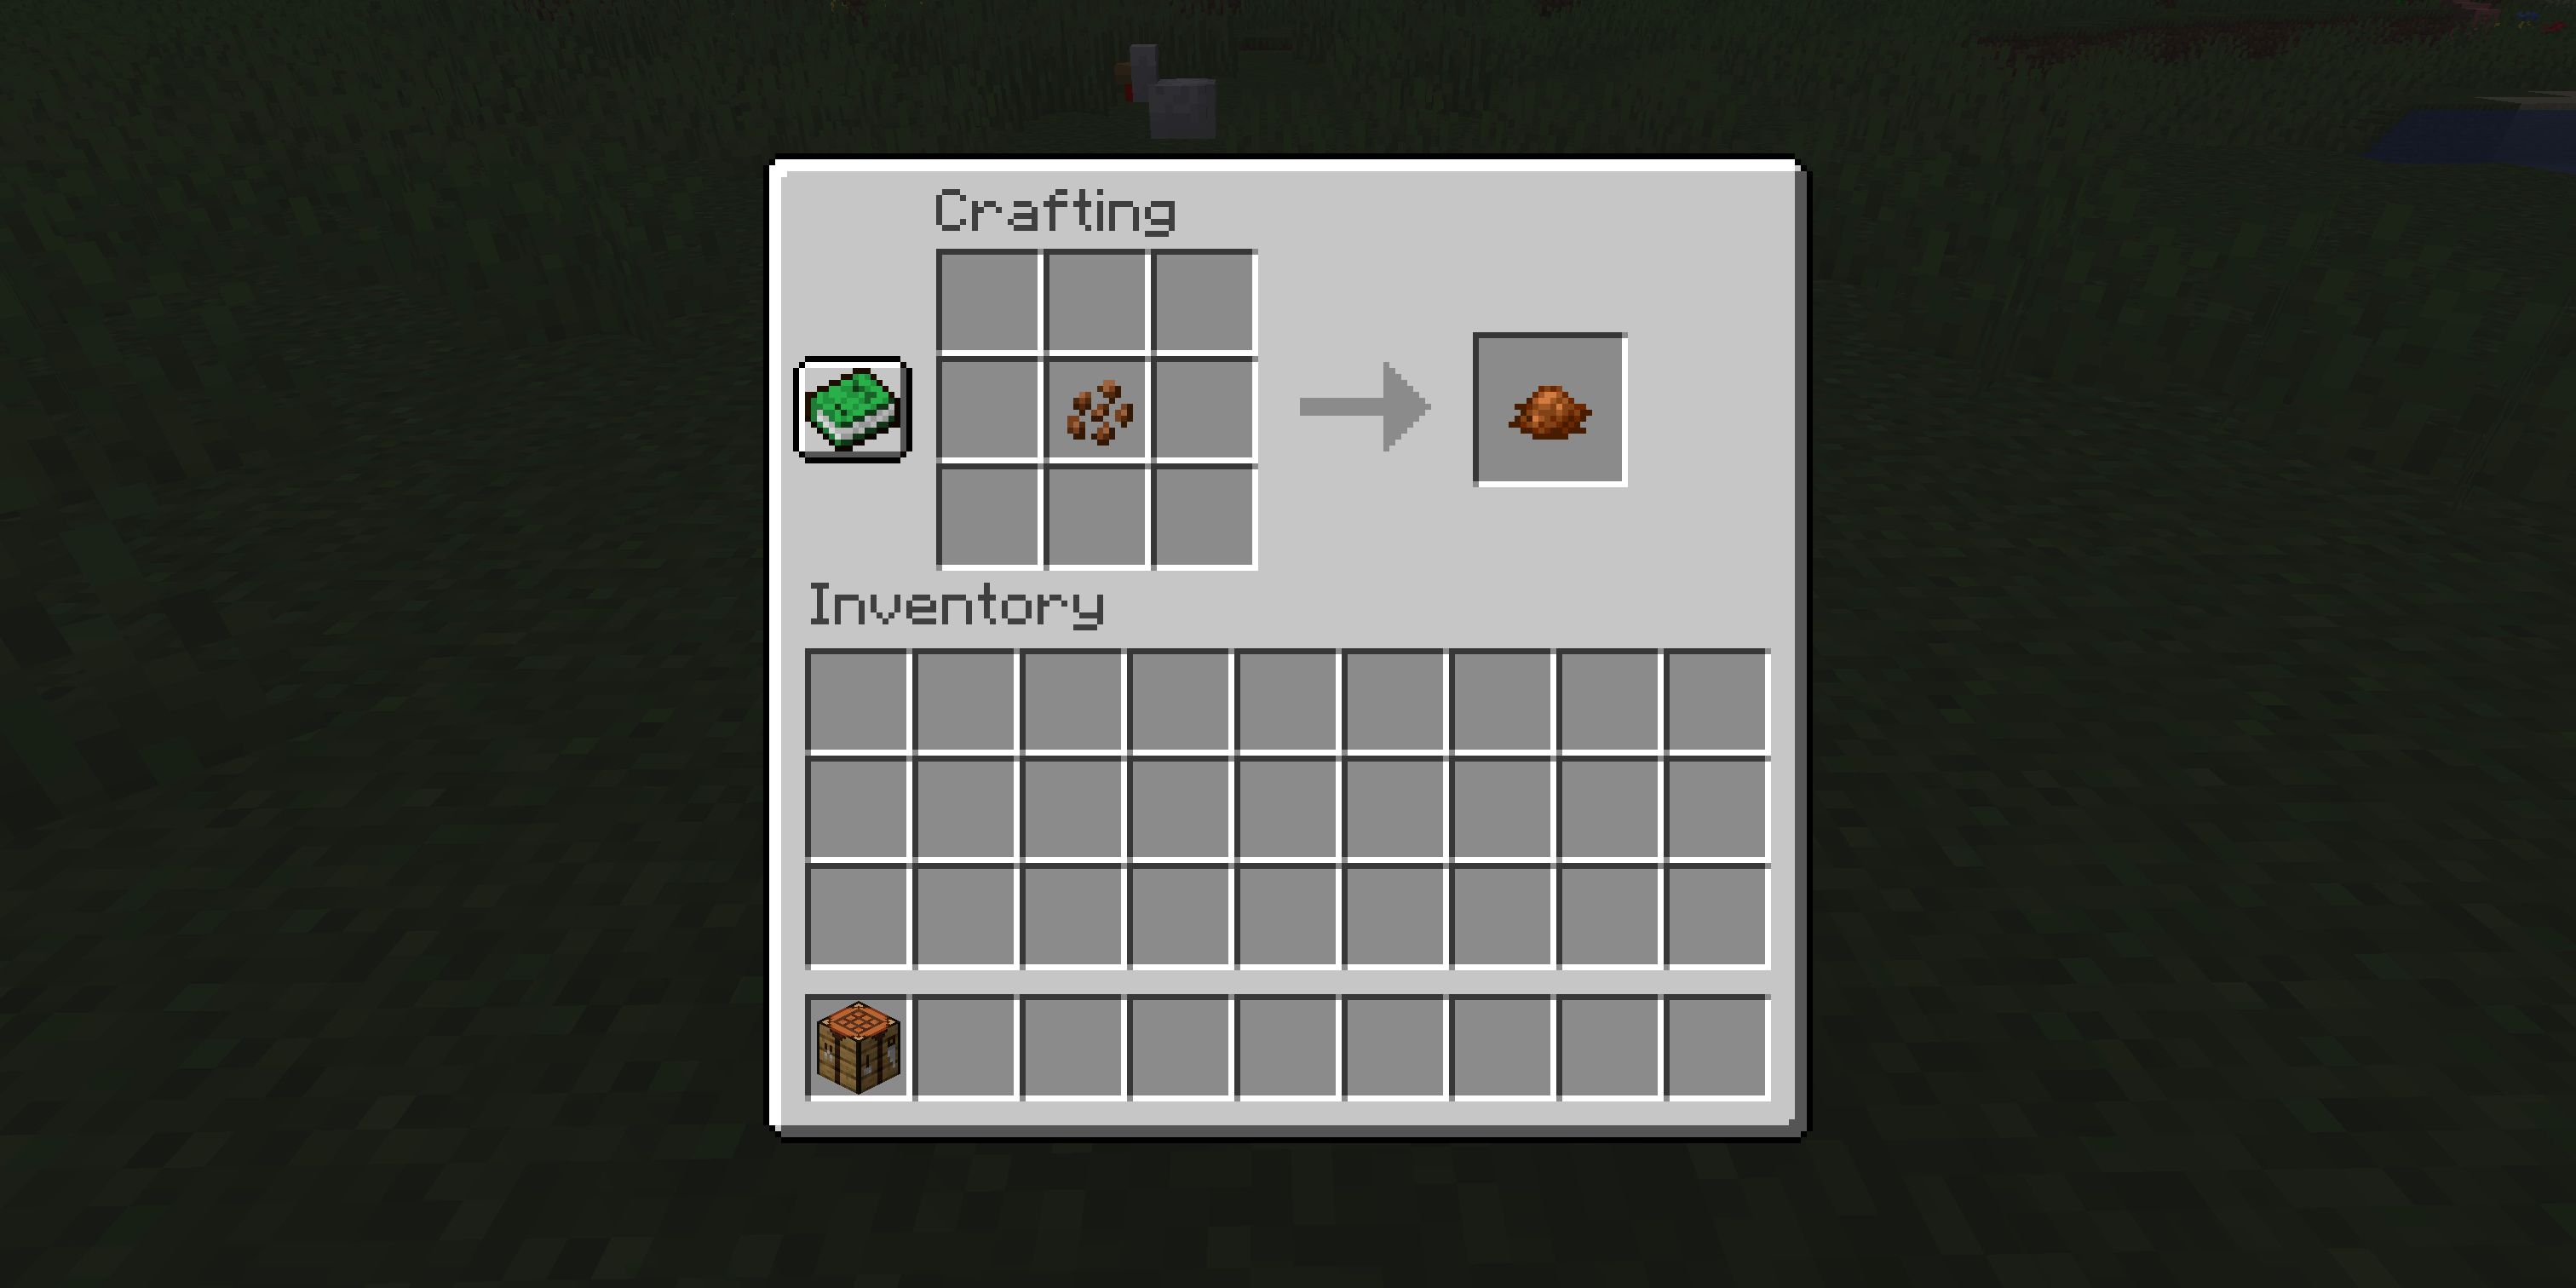 The crafting recipe for brown dye